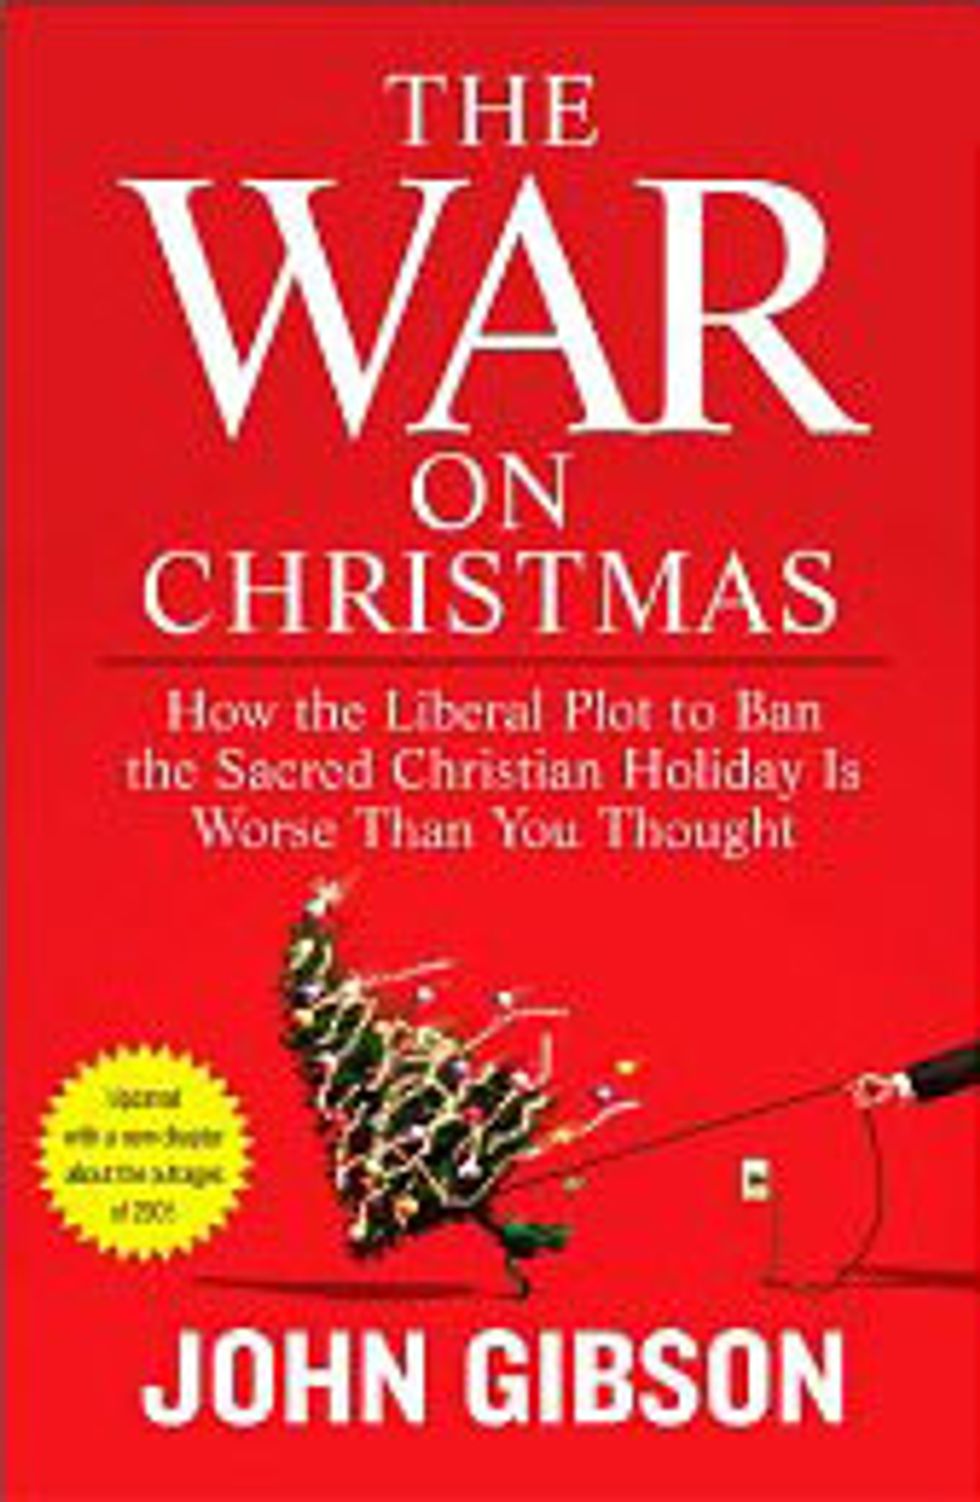 Your Wonkette Guide To the War On Christmas